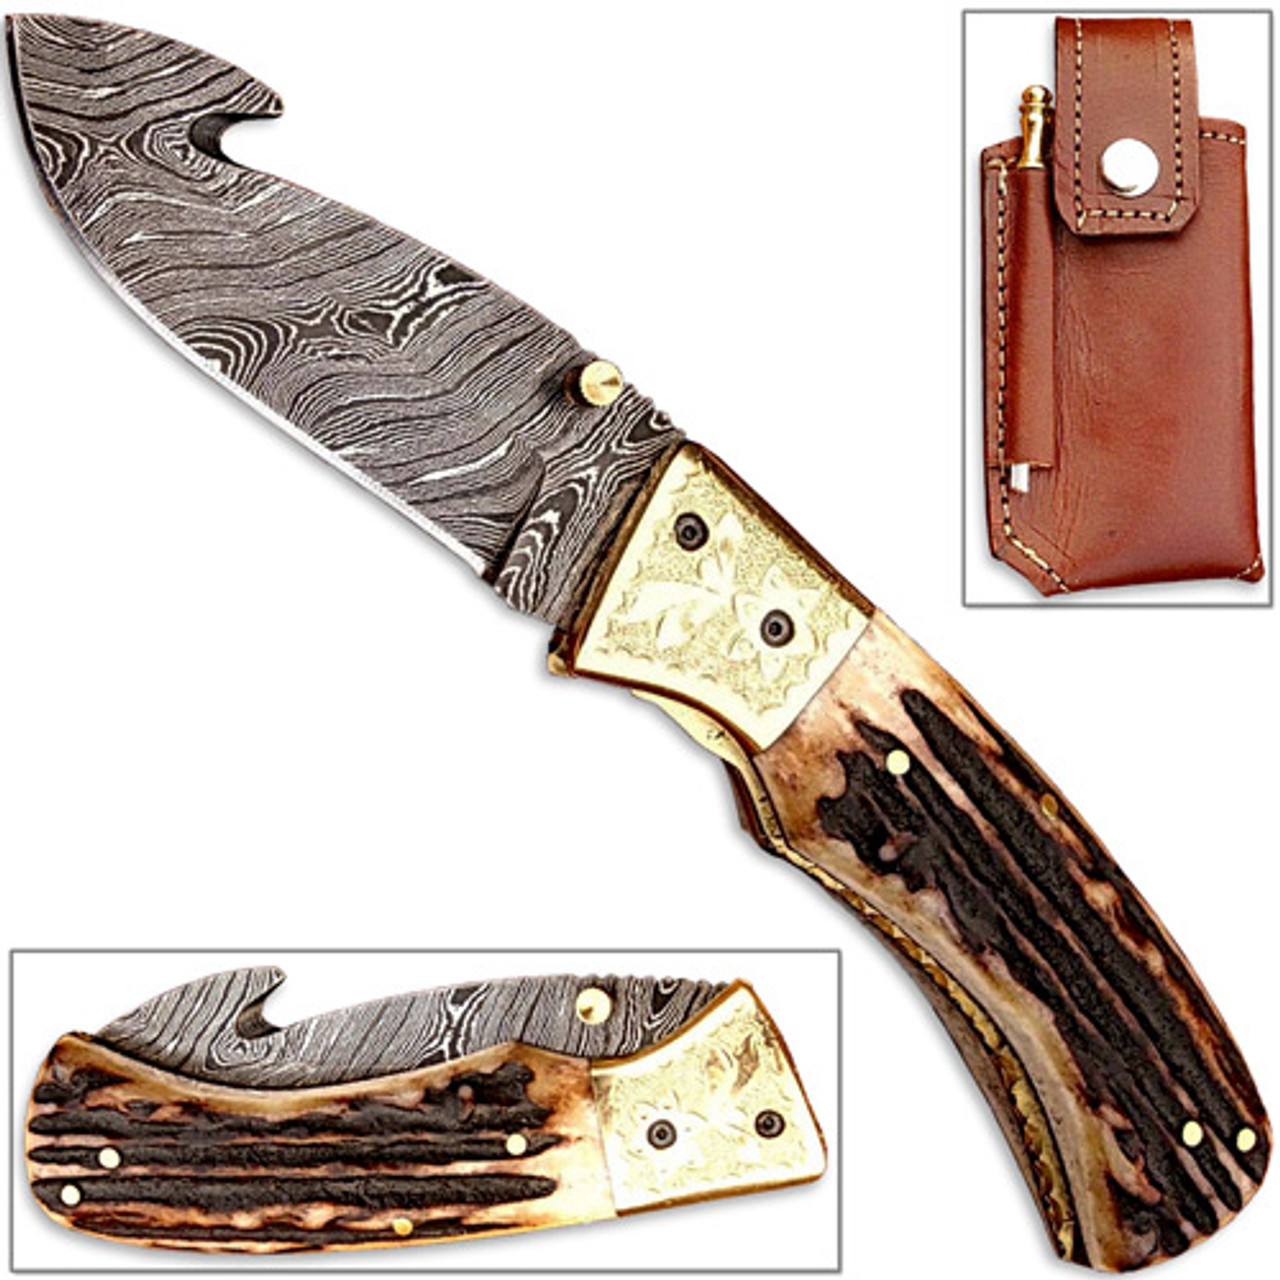 Custom Made Damascus Steel Gut Hook Hunting Knife W/ Stag Handle